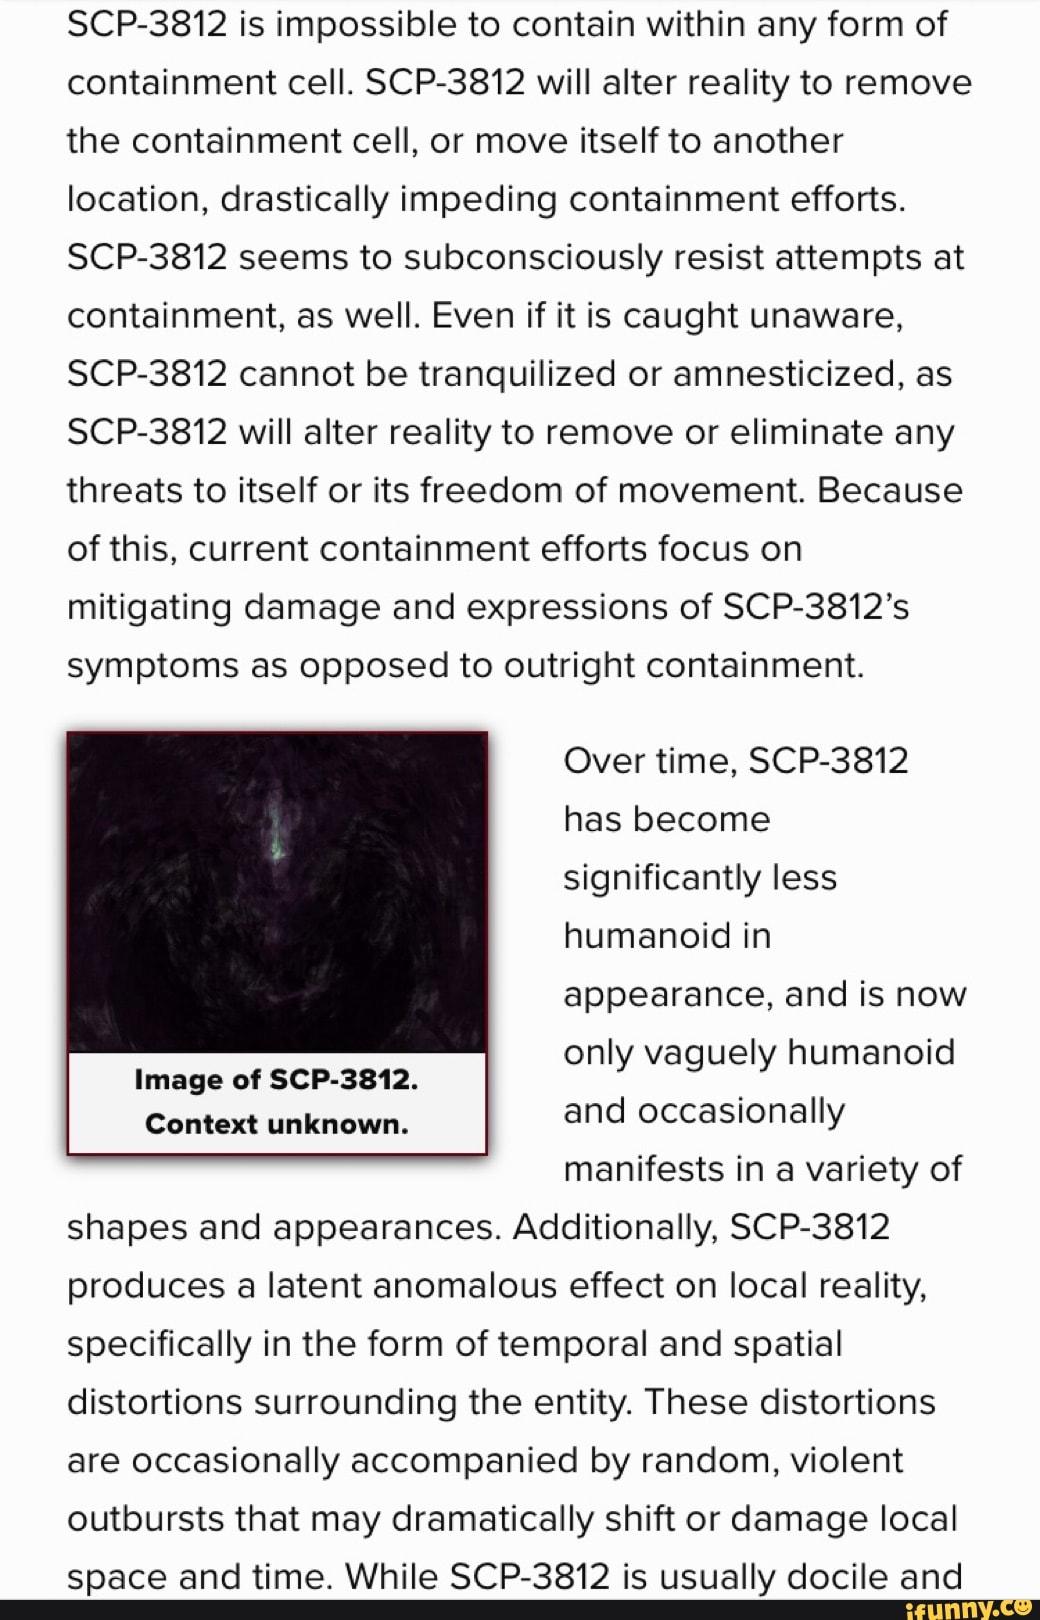 SCP 3812 is the most powerful character in all of fiction,change